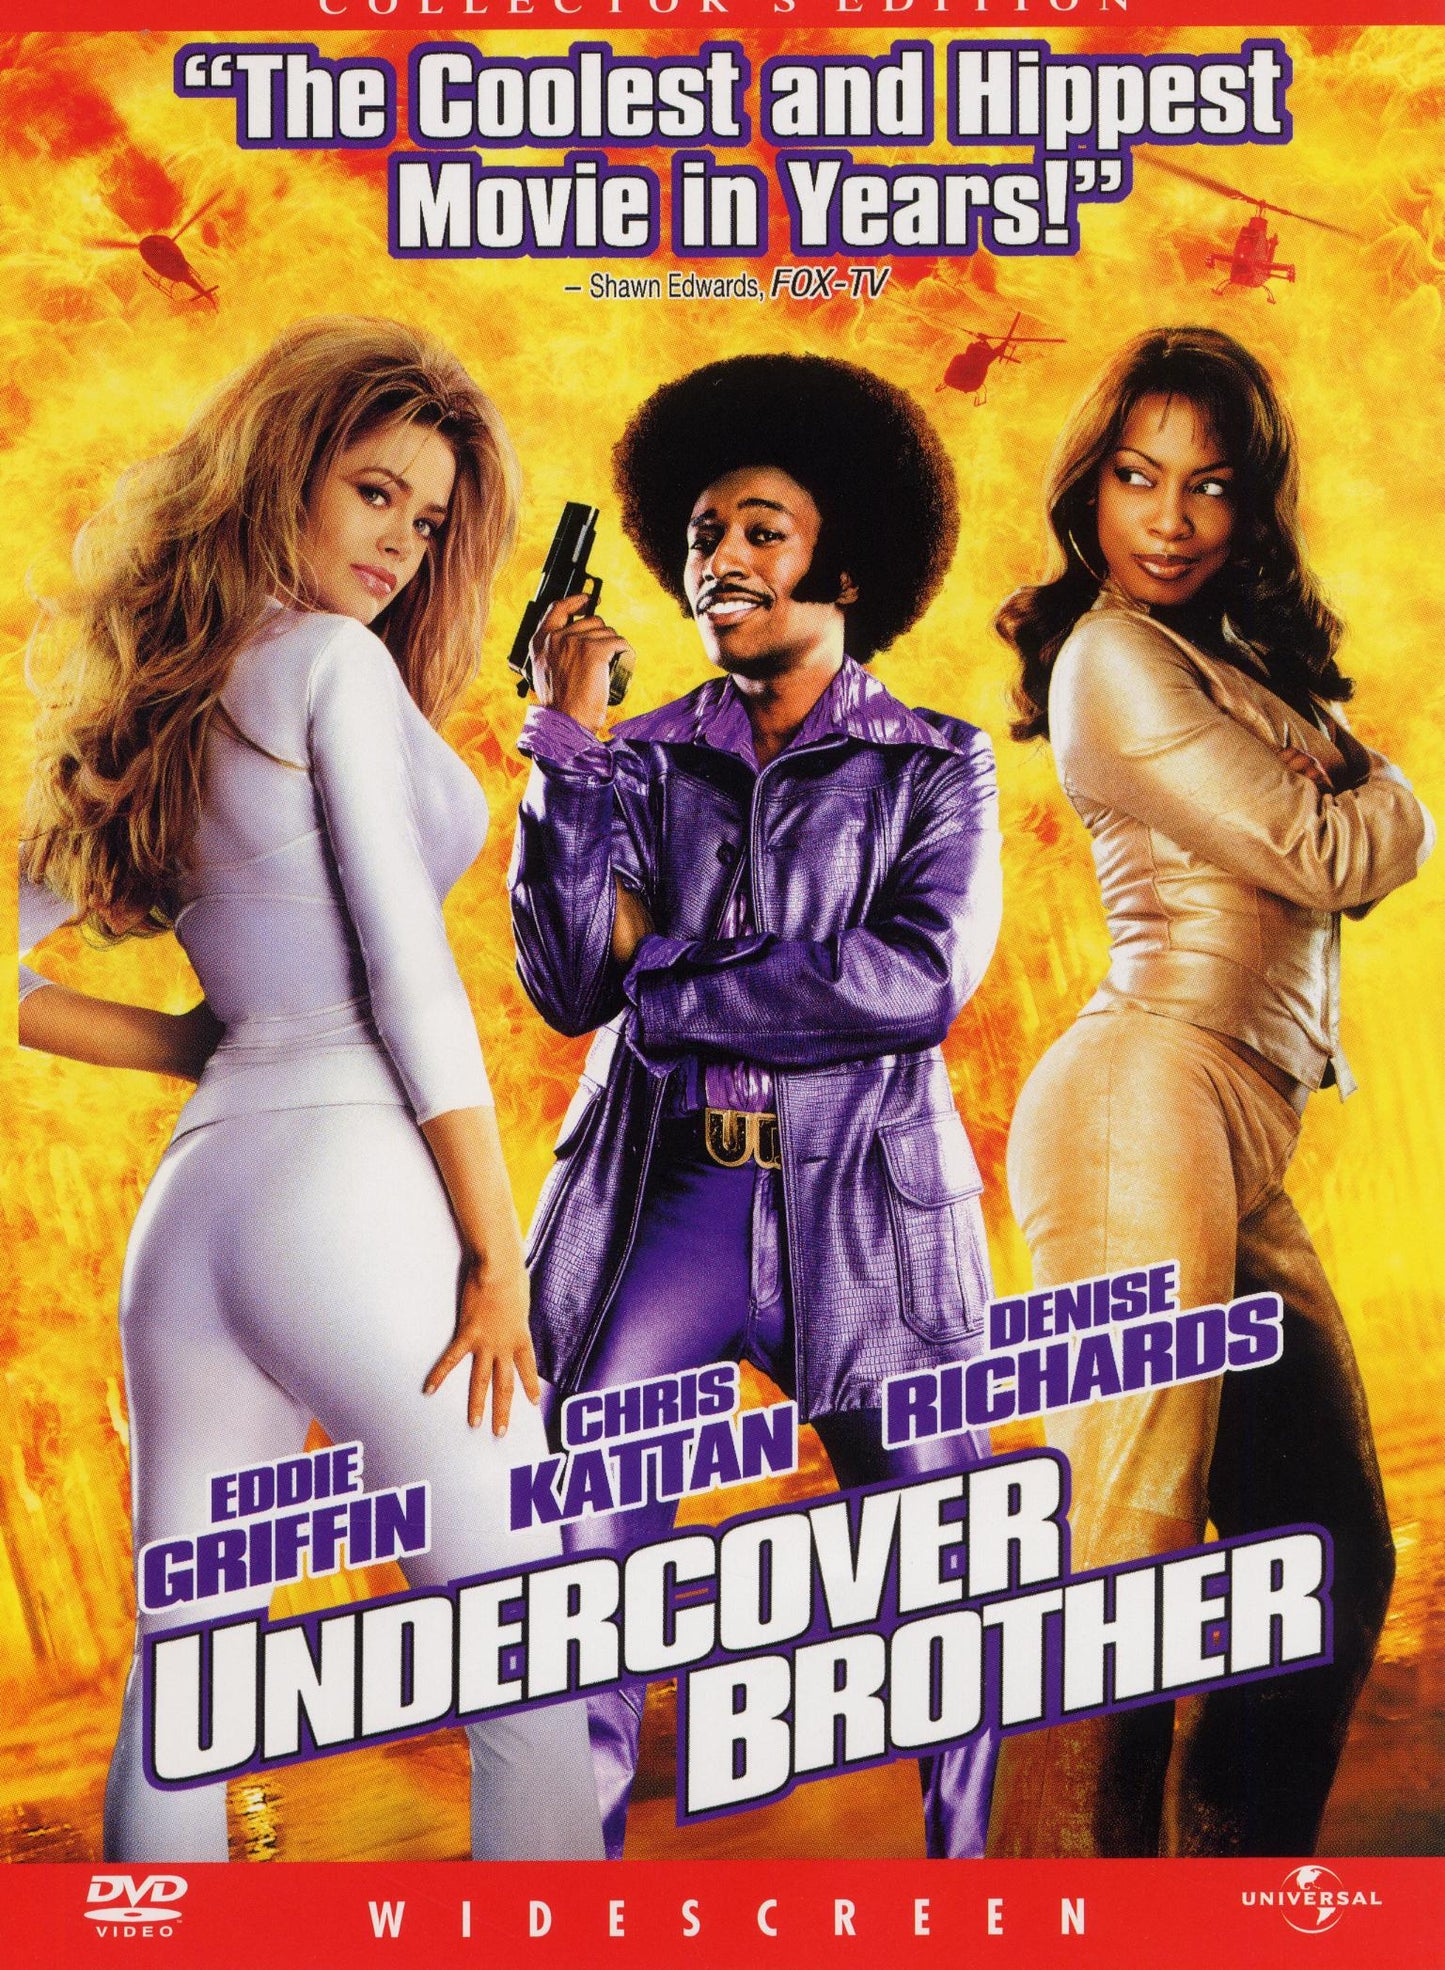 Undercover Brother [WS Collector's Edition] cover art